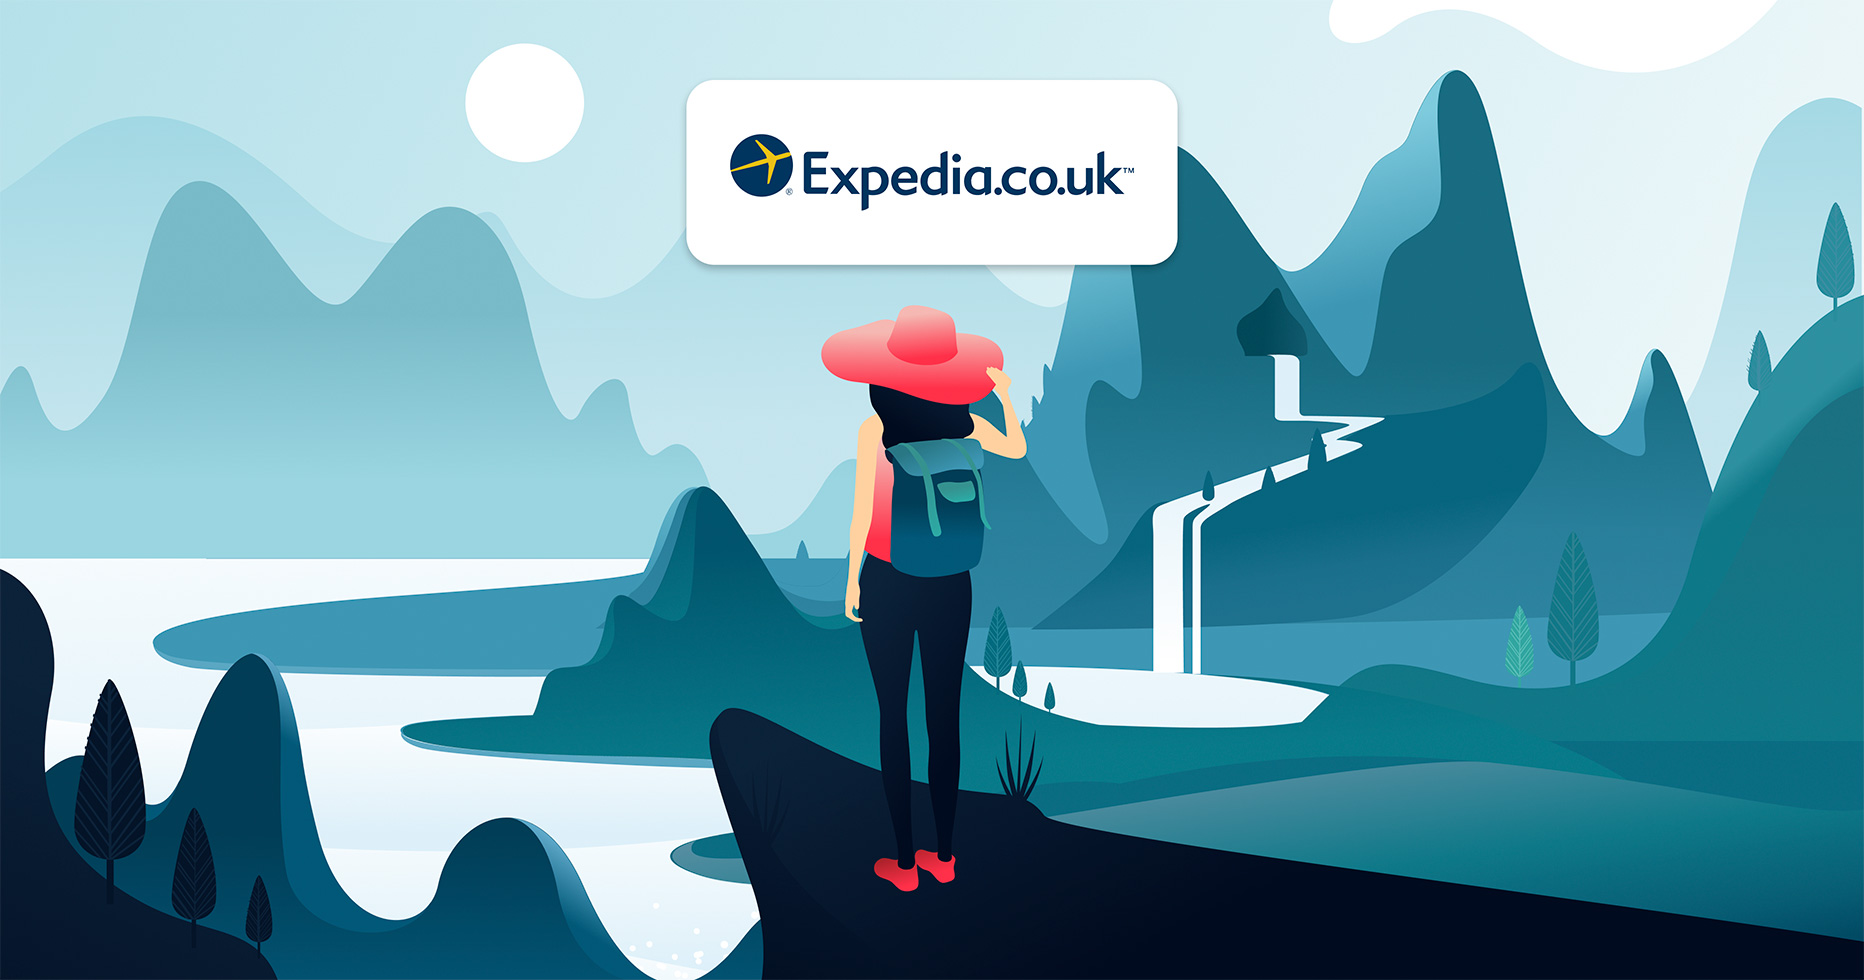 Earn with Expedia UK, a booking platform for travel services